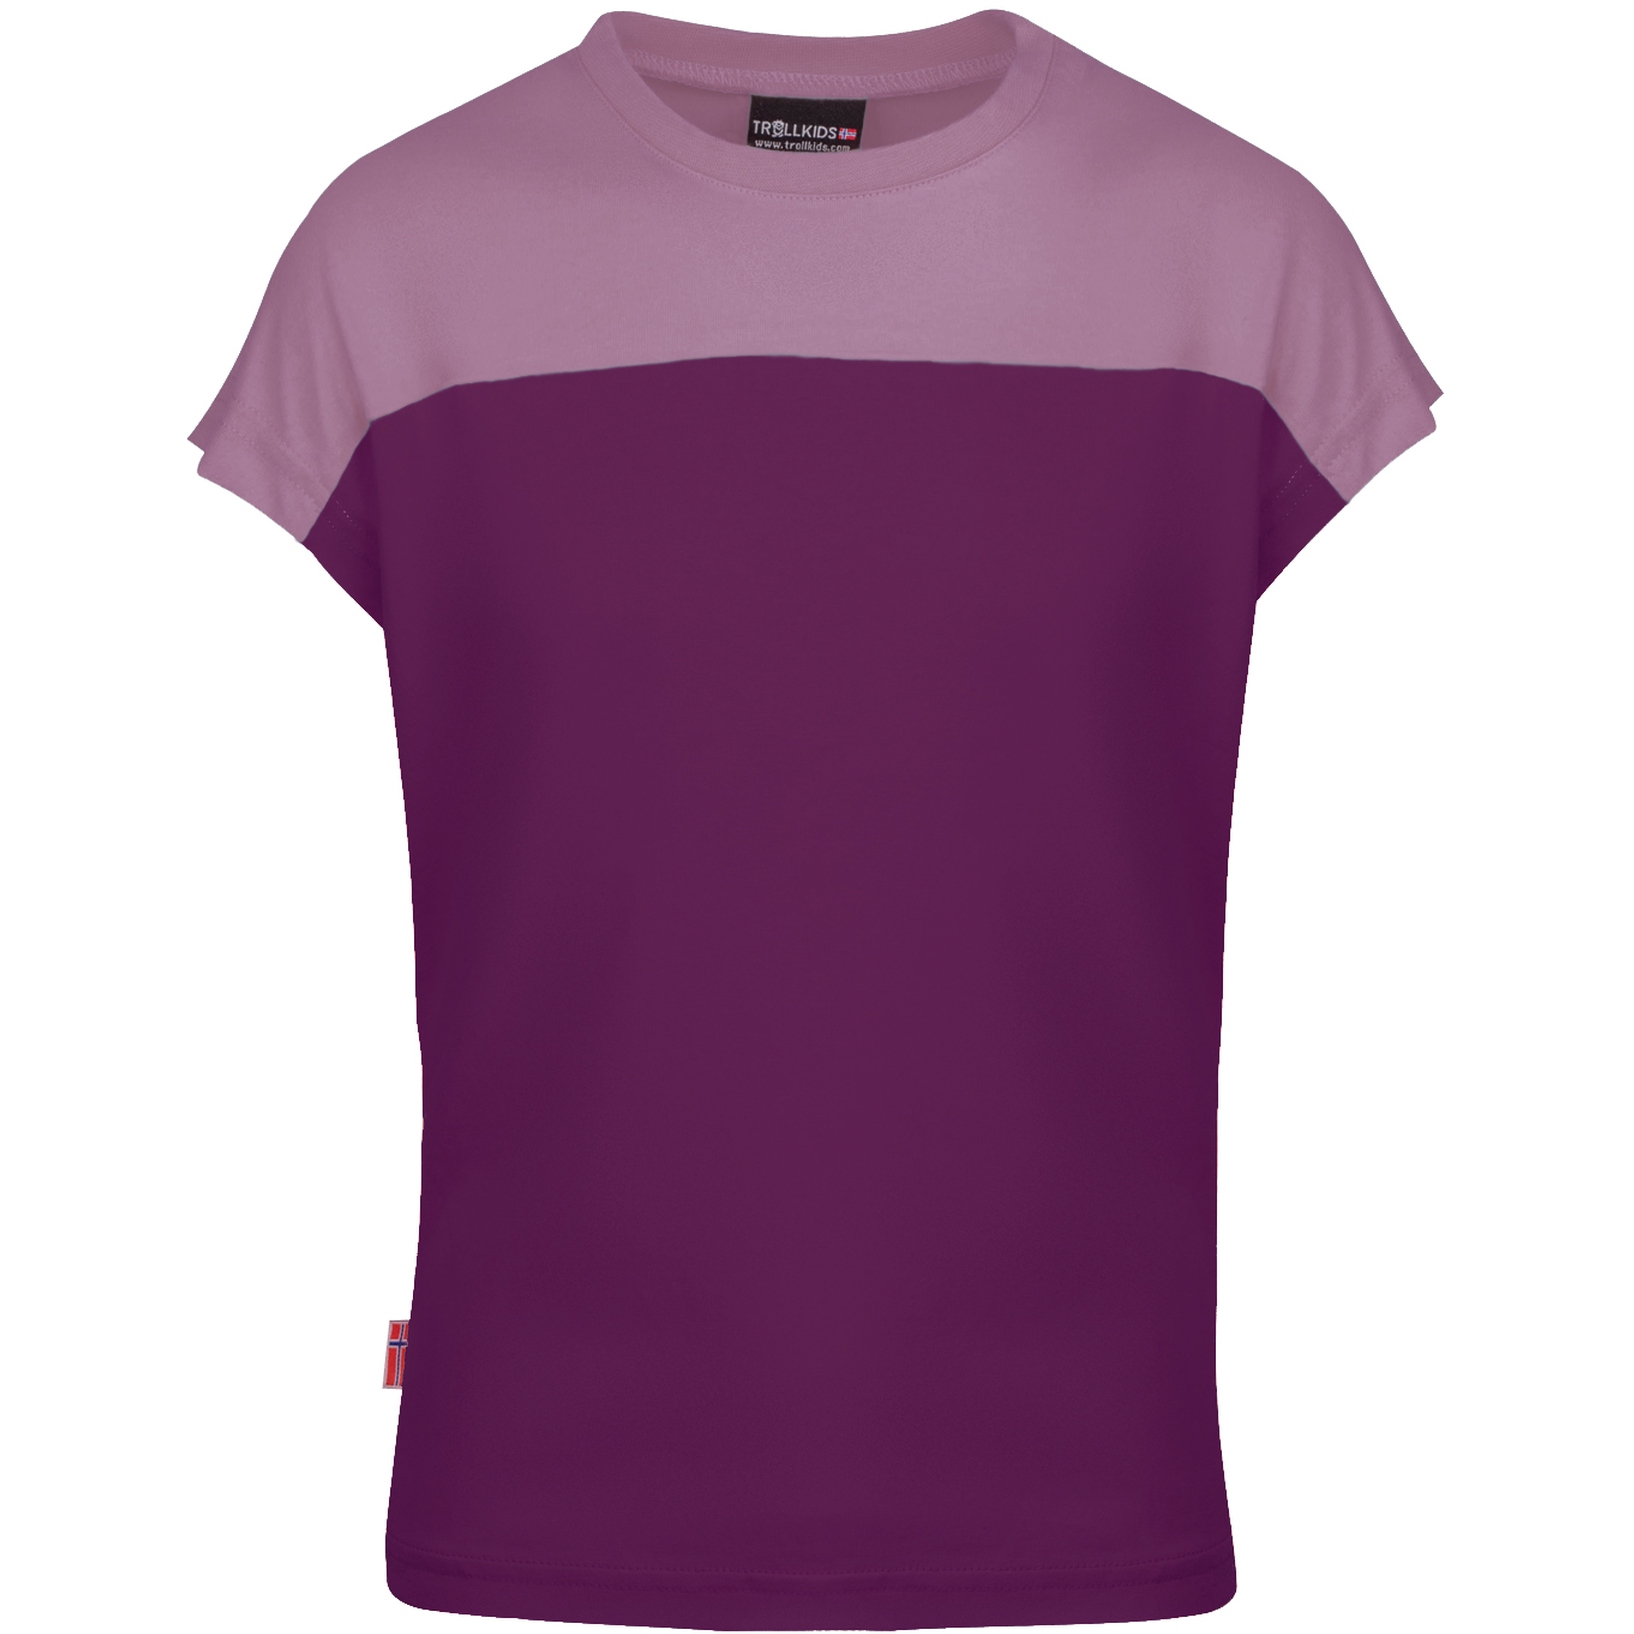 Picture of Trollkids Bergen Girls T-Shirt - mulberry/orchid